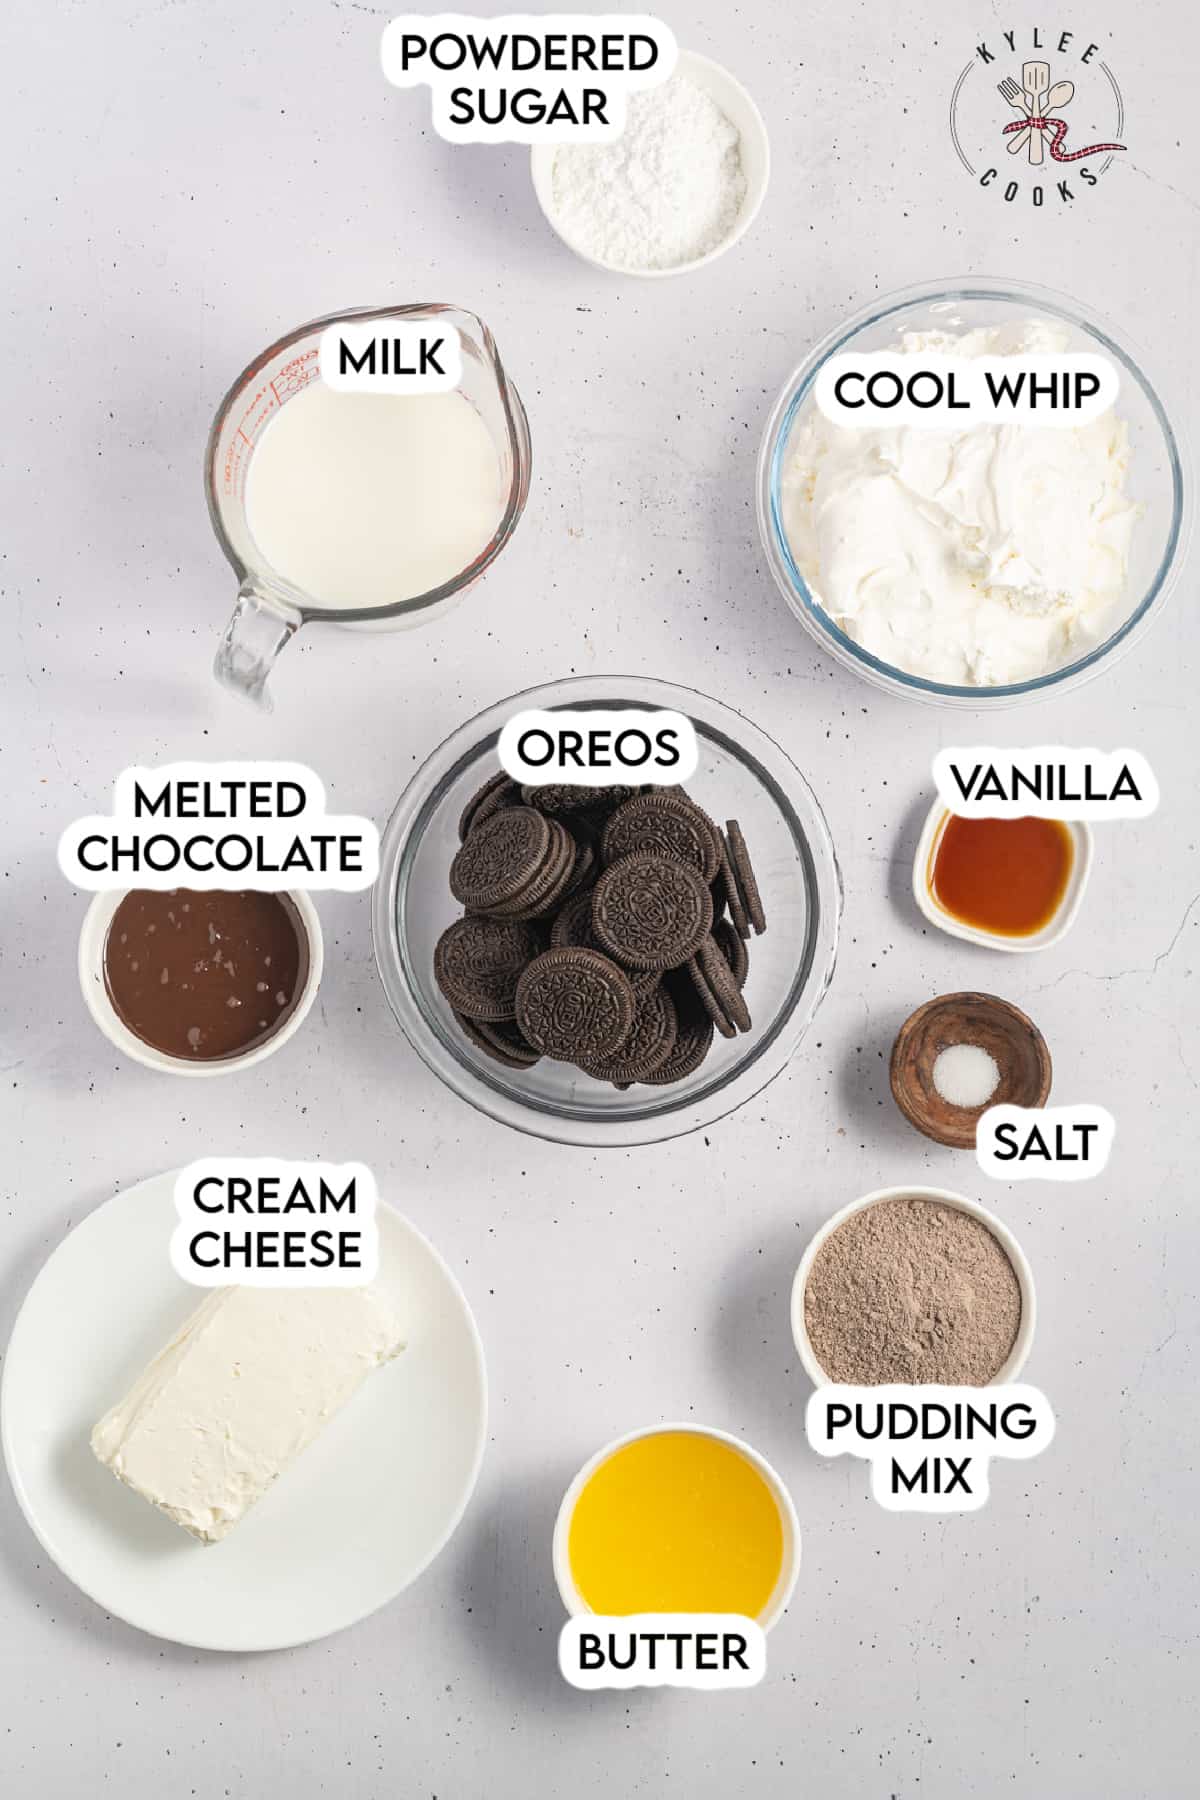 ingredients to make chocolate pie laid out and labeled.